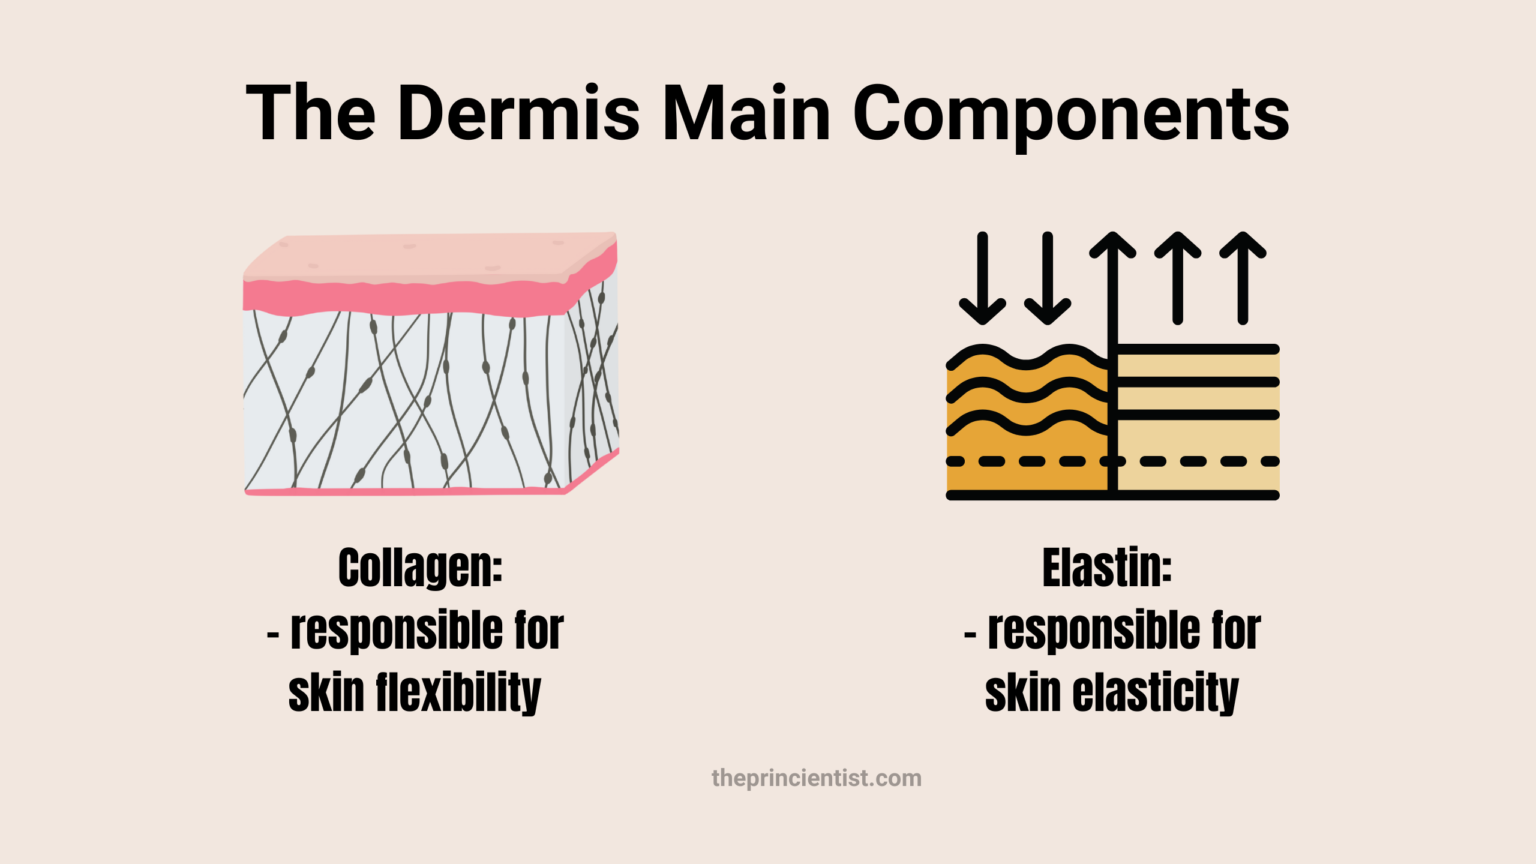 what is skin blog post - representative image of the dermis main components: collagen and elastin